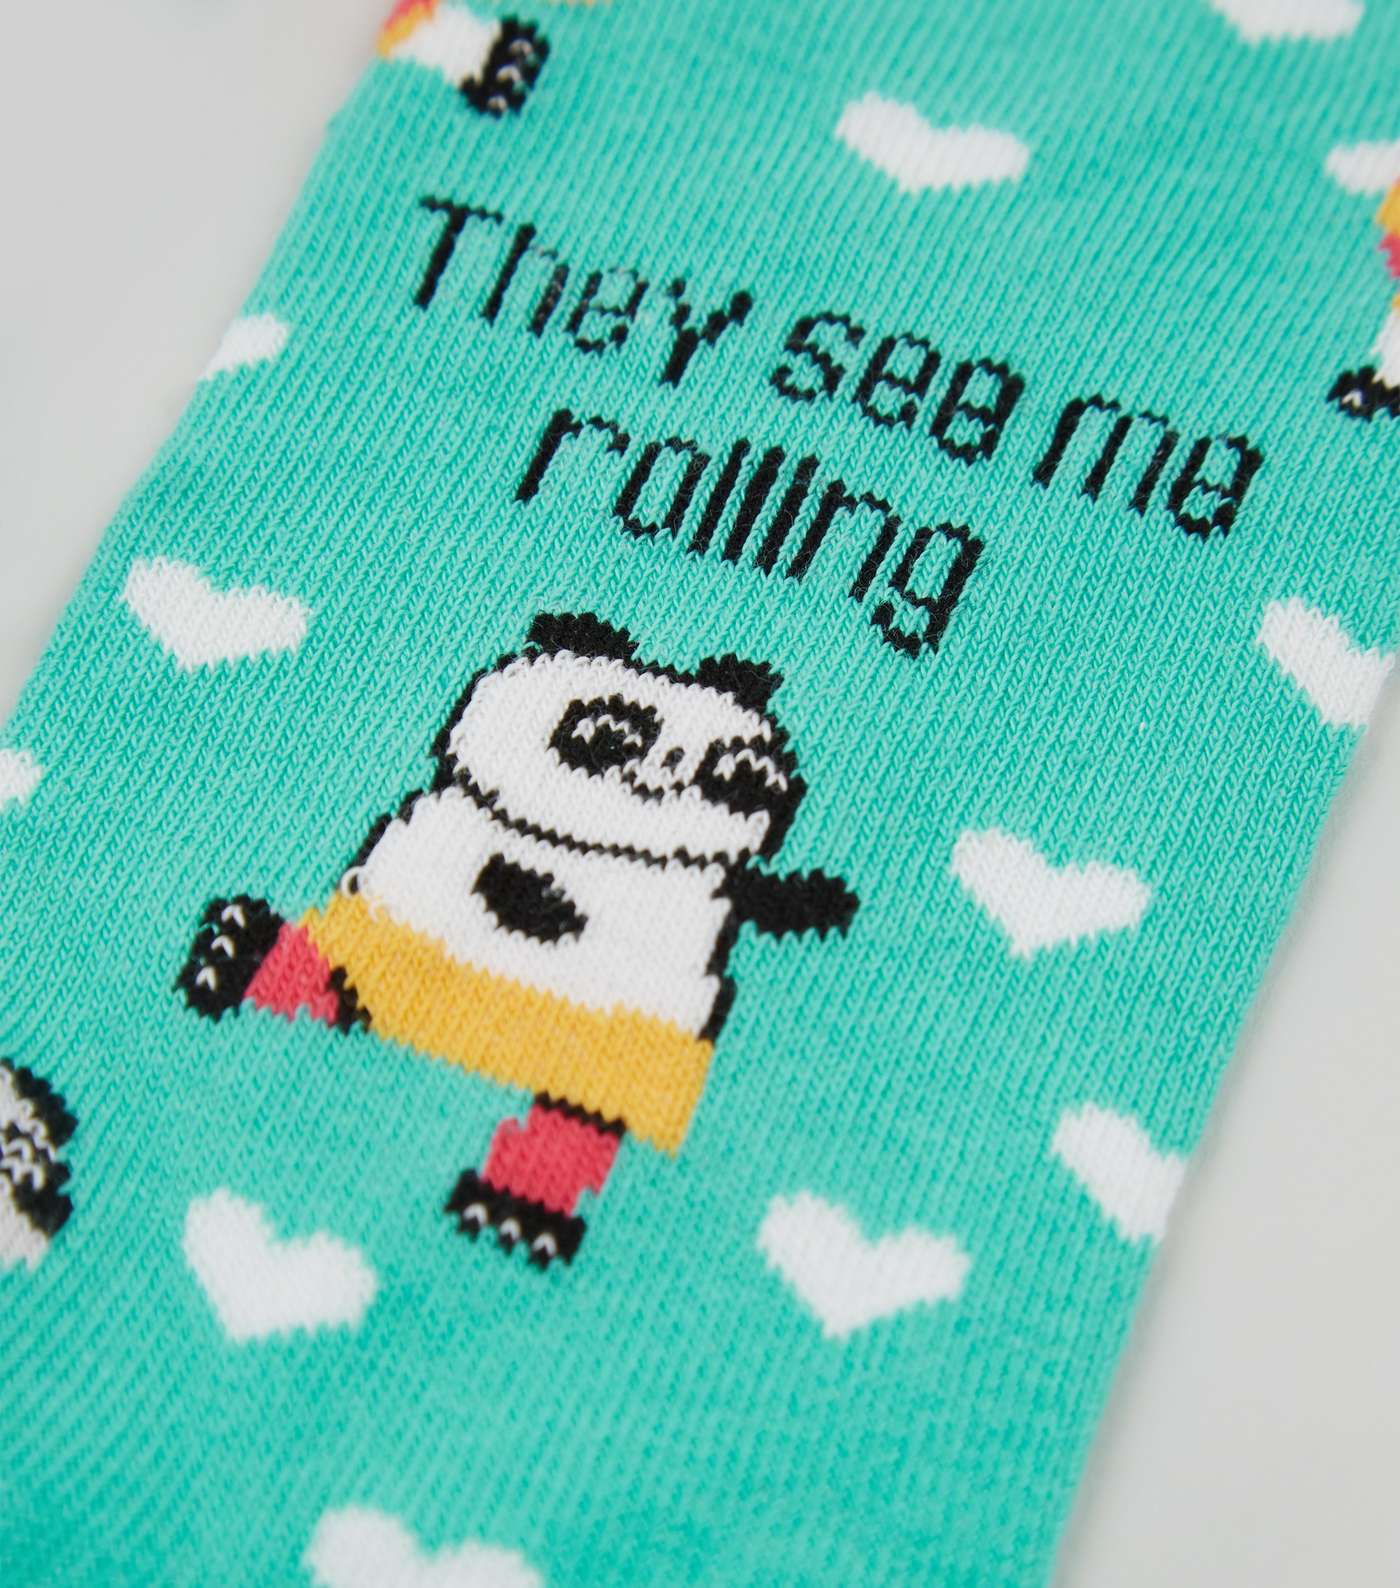 Mint Green They See Me Rolling Slogan Socks Image 3